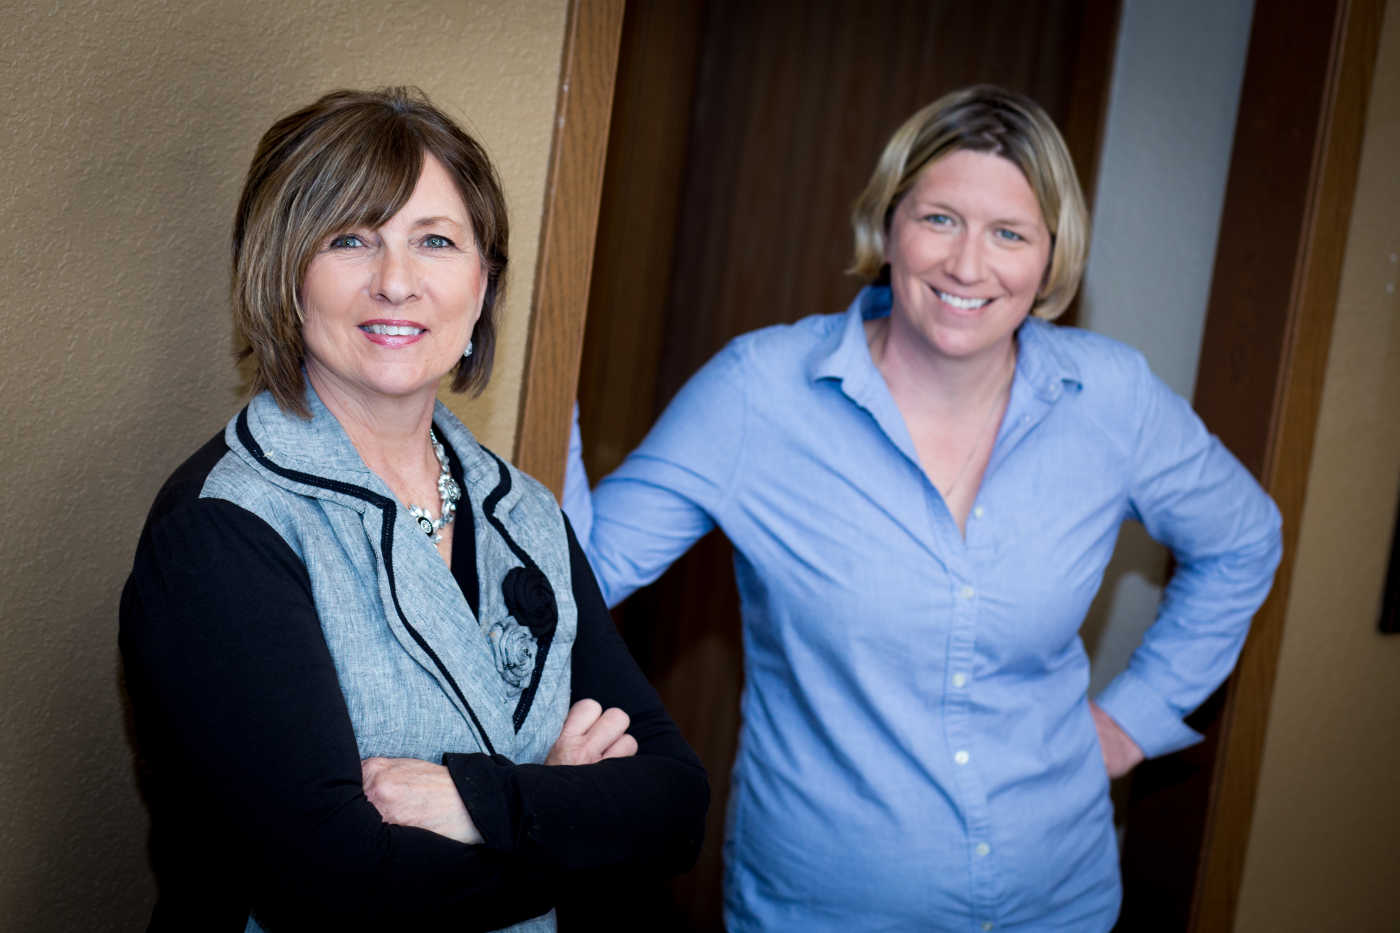 Bev and Michelle - Financial Advisors and authors of Creating Your Dream Retirement